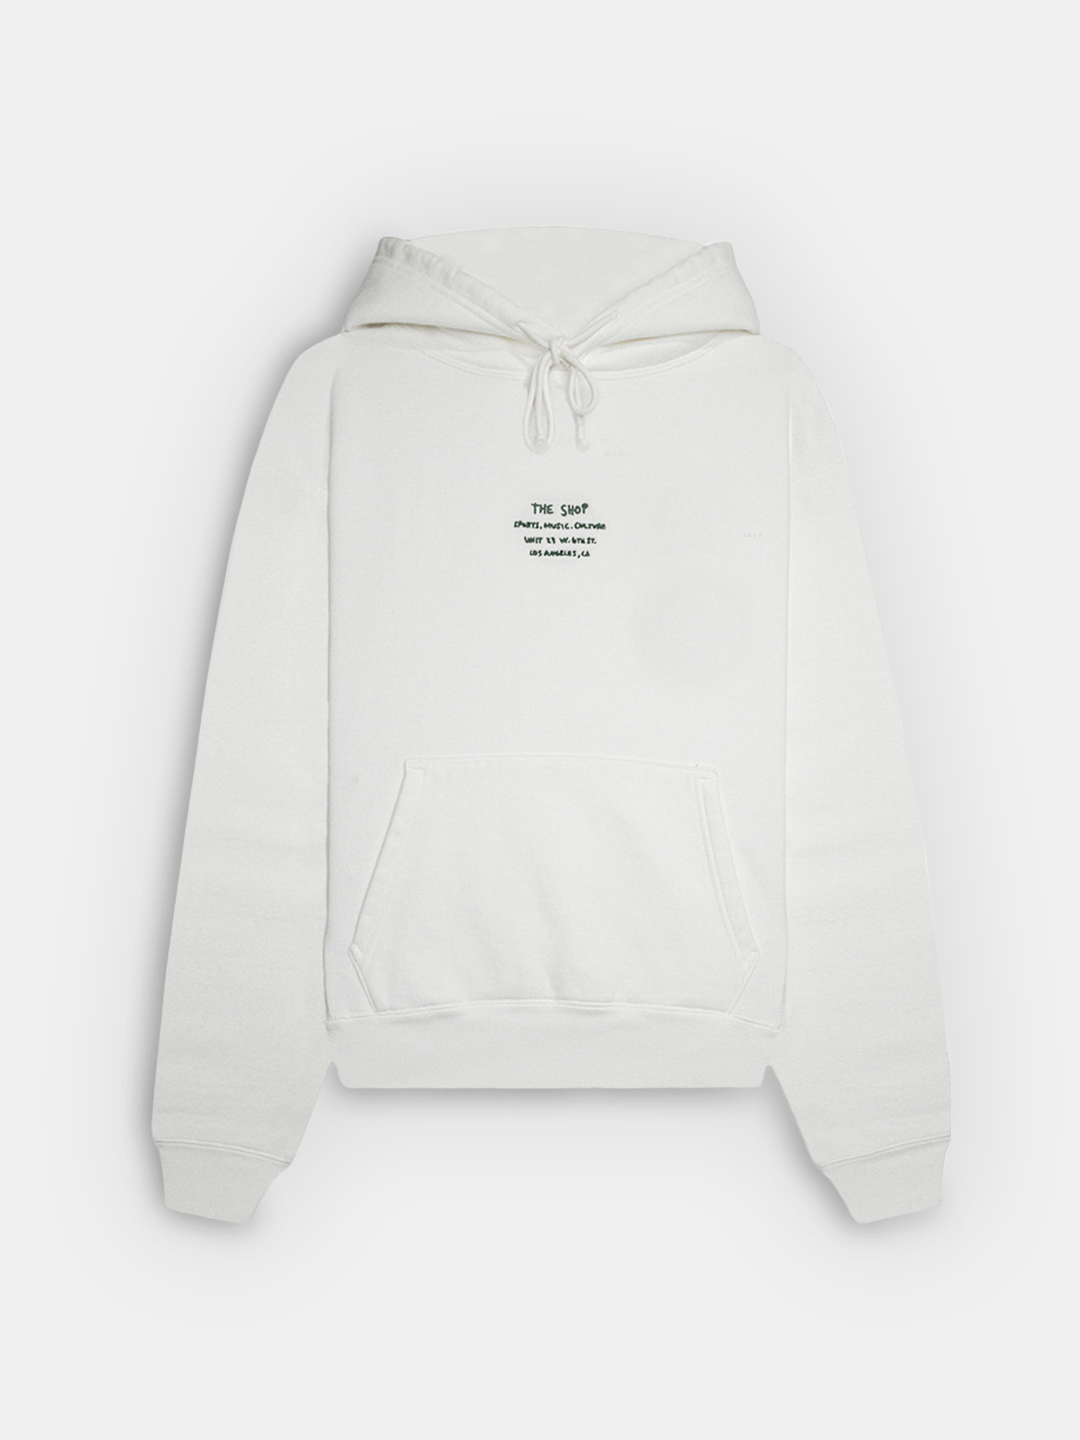 The Shop By Hand Fleece Hoodie Ivory | UNINTERRUPTED® – Uninterrupted Store